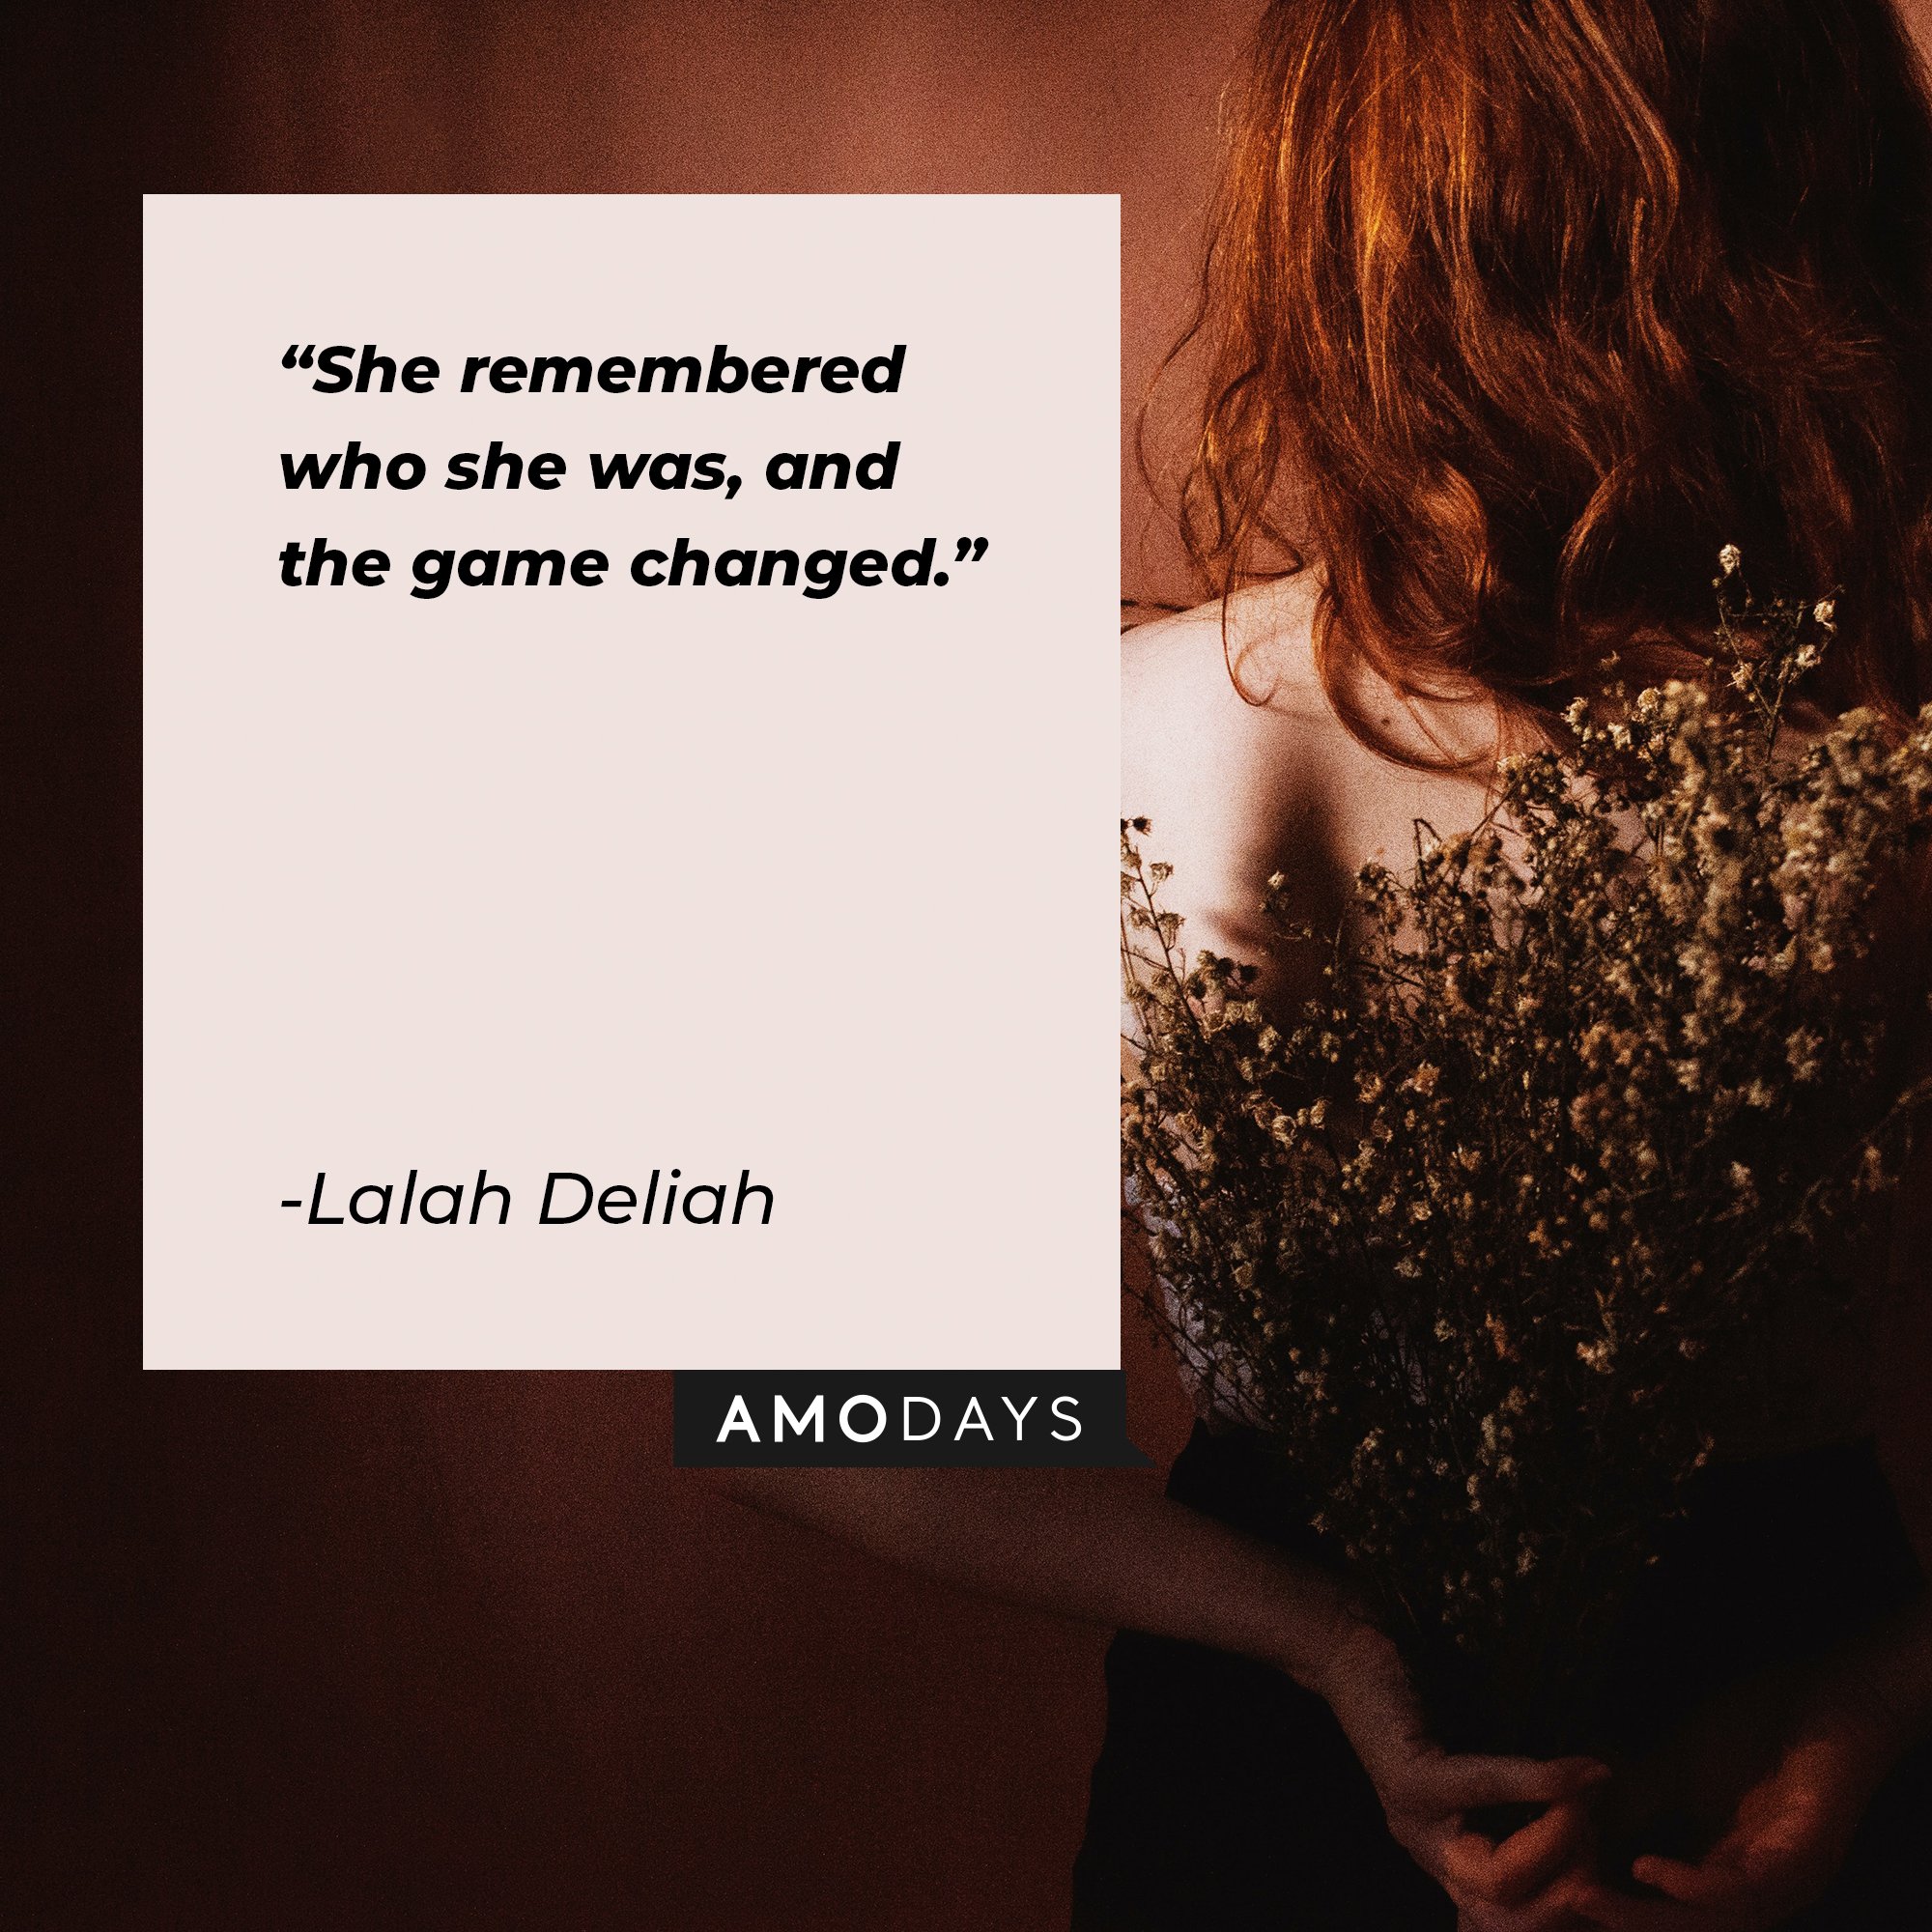 Lalah Deliah’s quote: "She remembered who she was, and the game changed." | Image: AmoDays